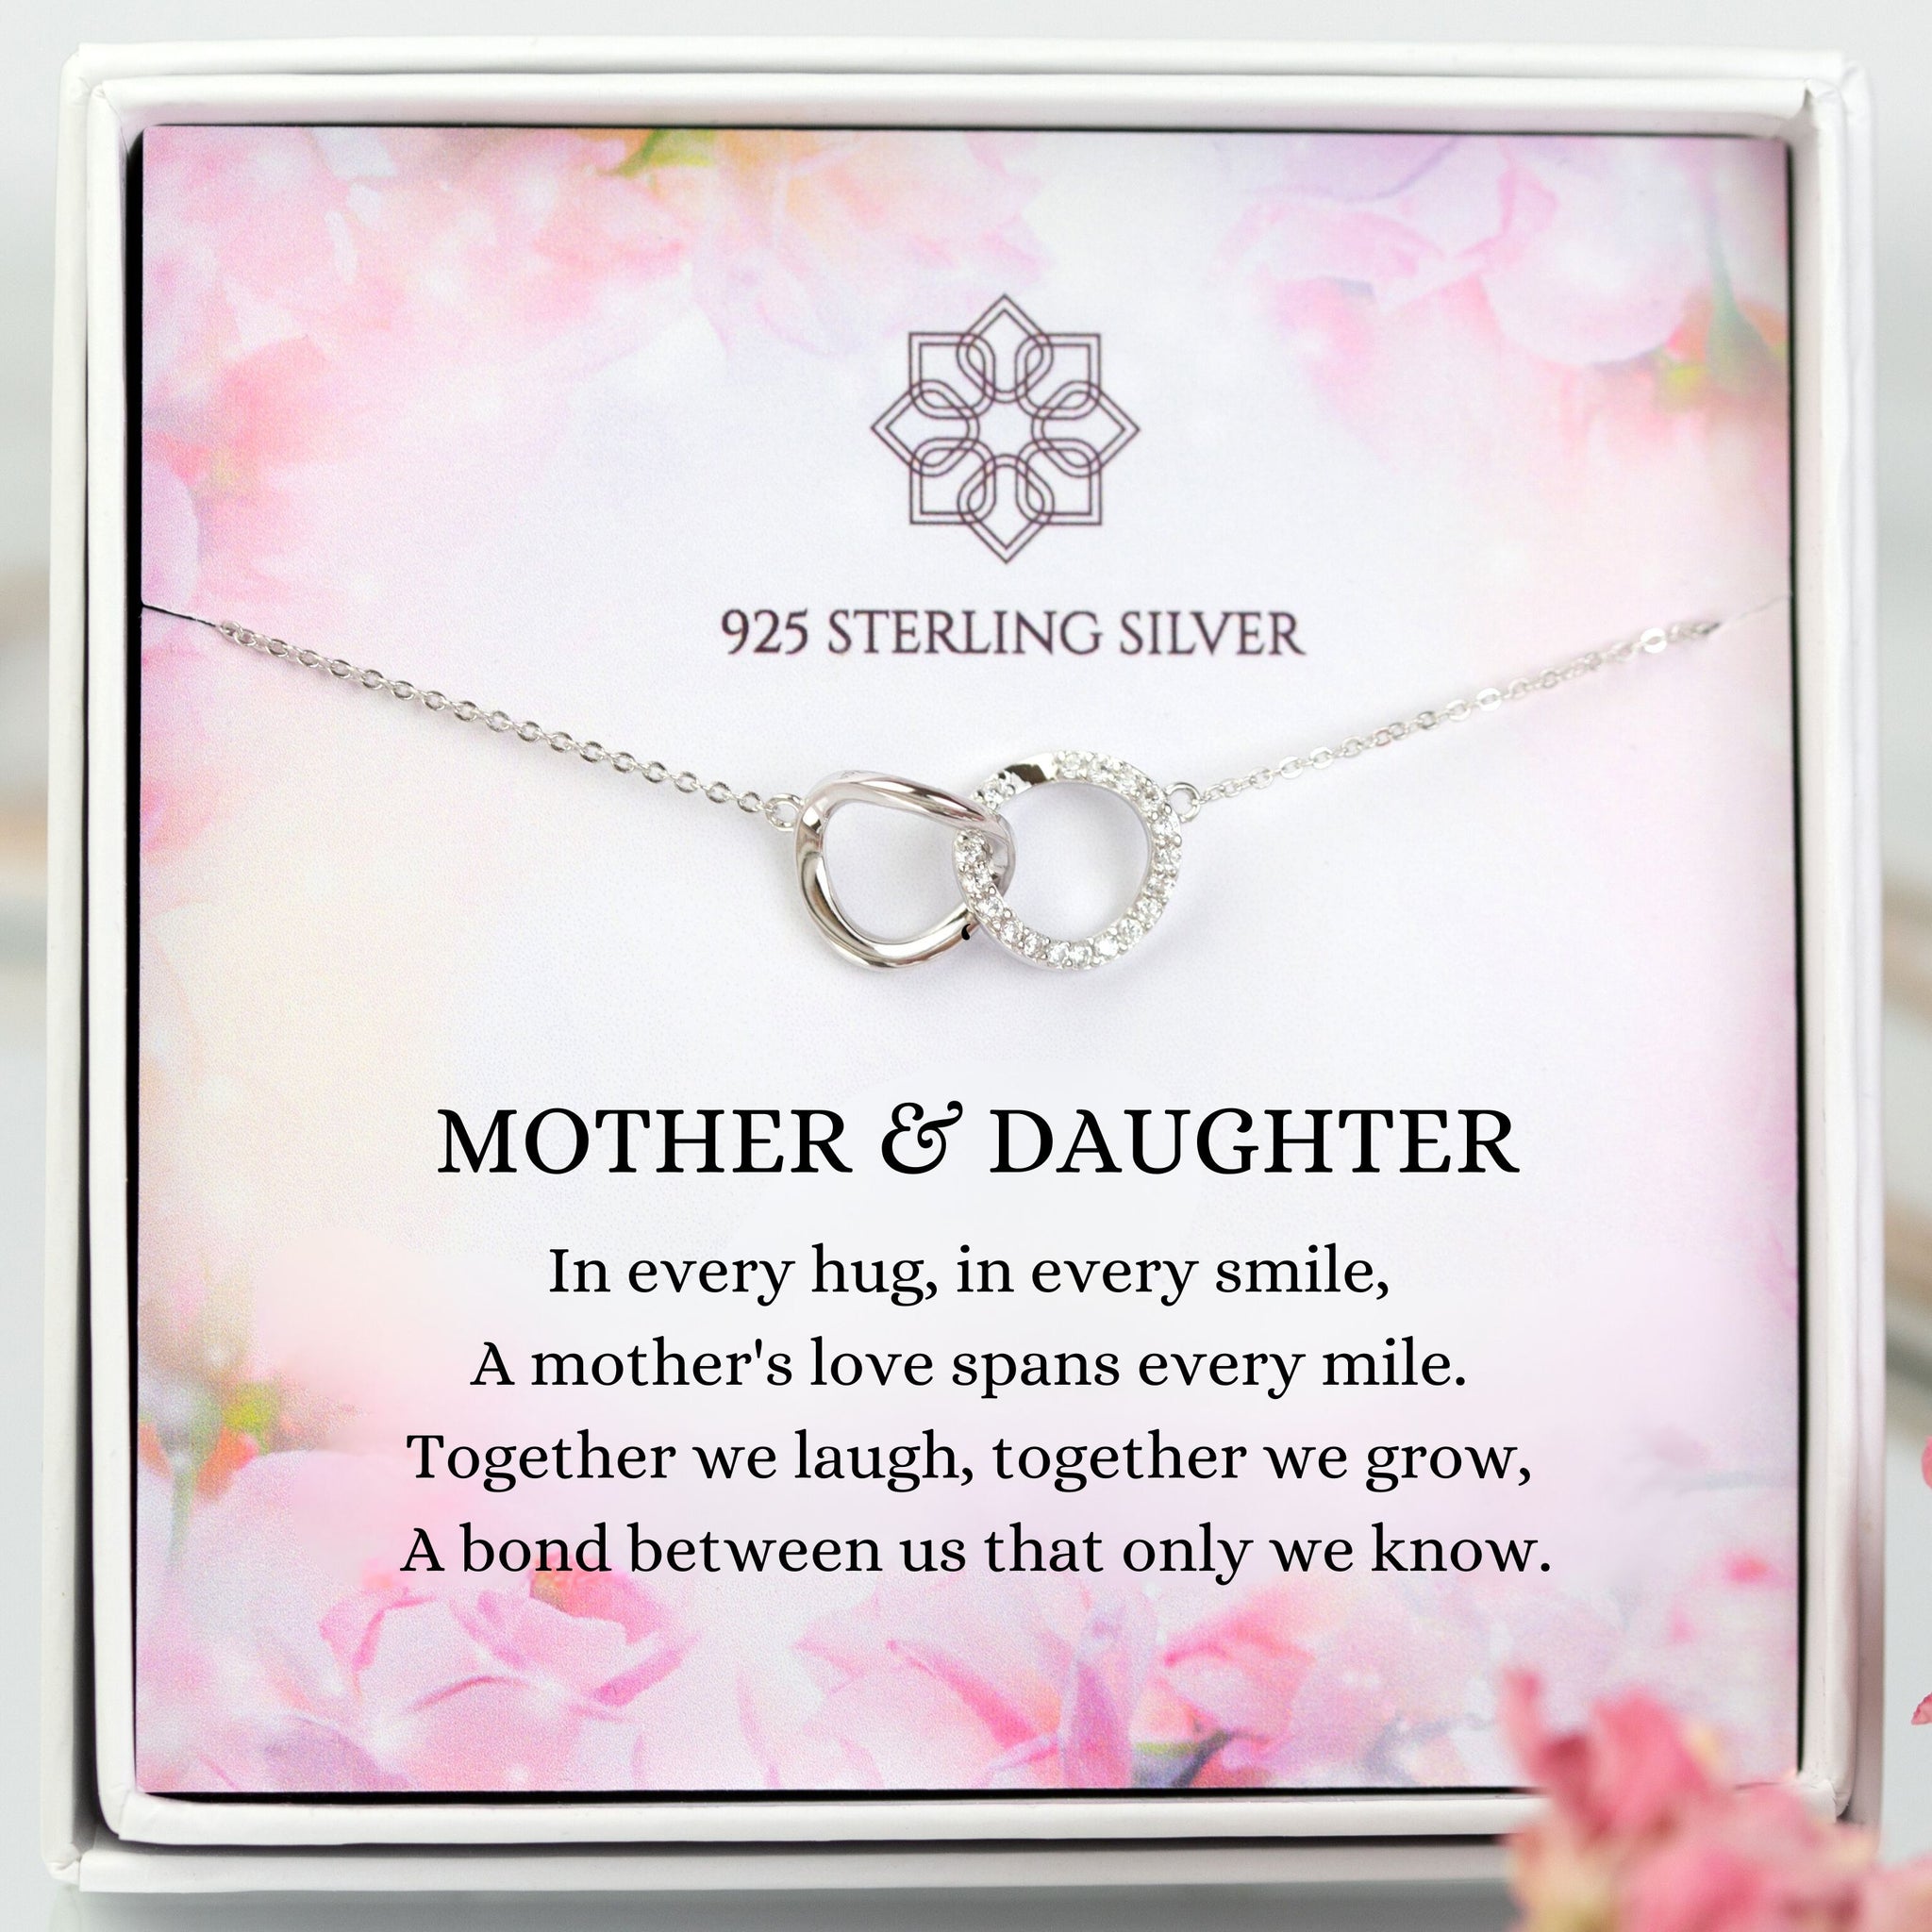 Sparkling Sentiments: Mother's Day Jewellery Gifts That Illuminate Love and Appreciation